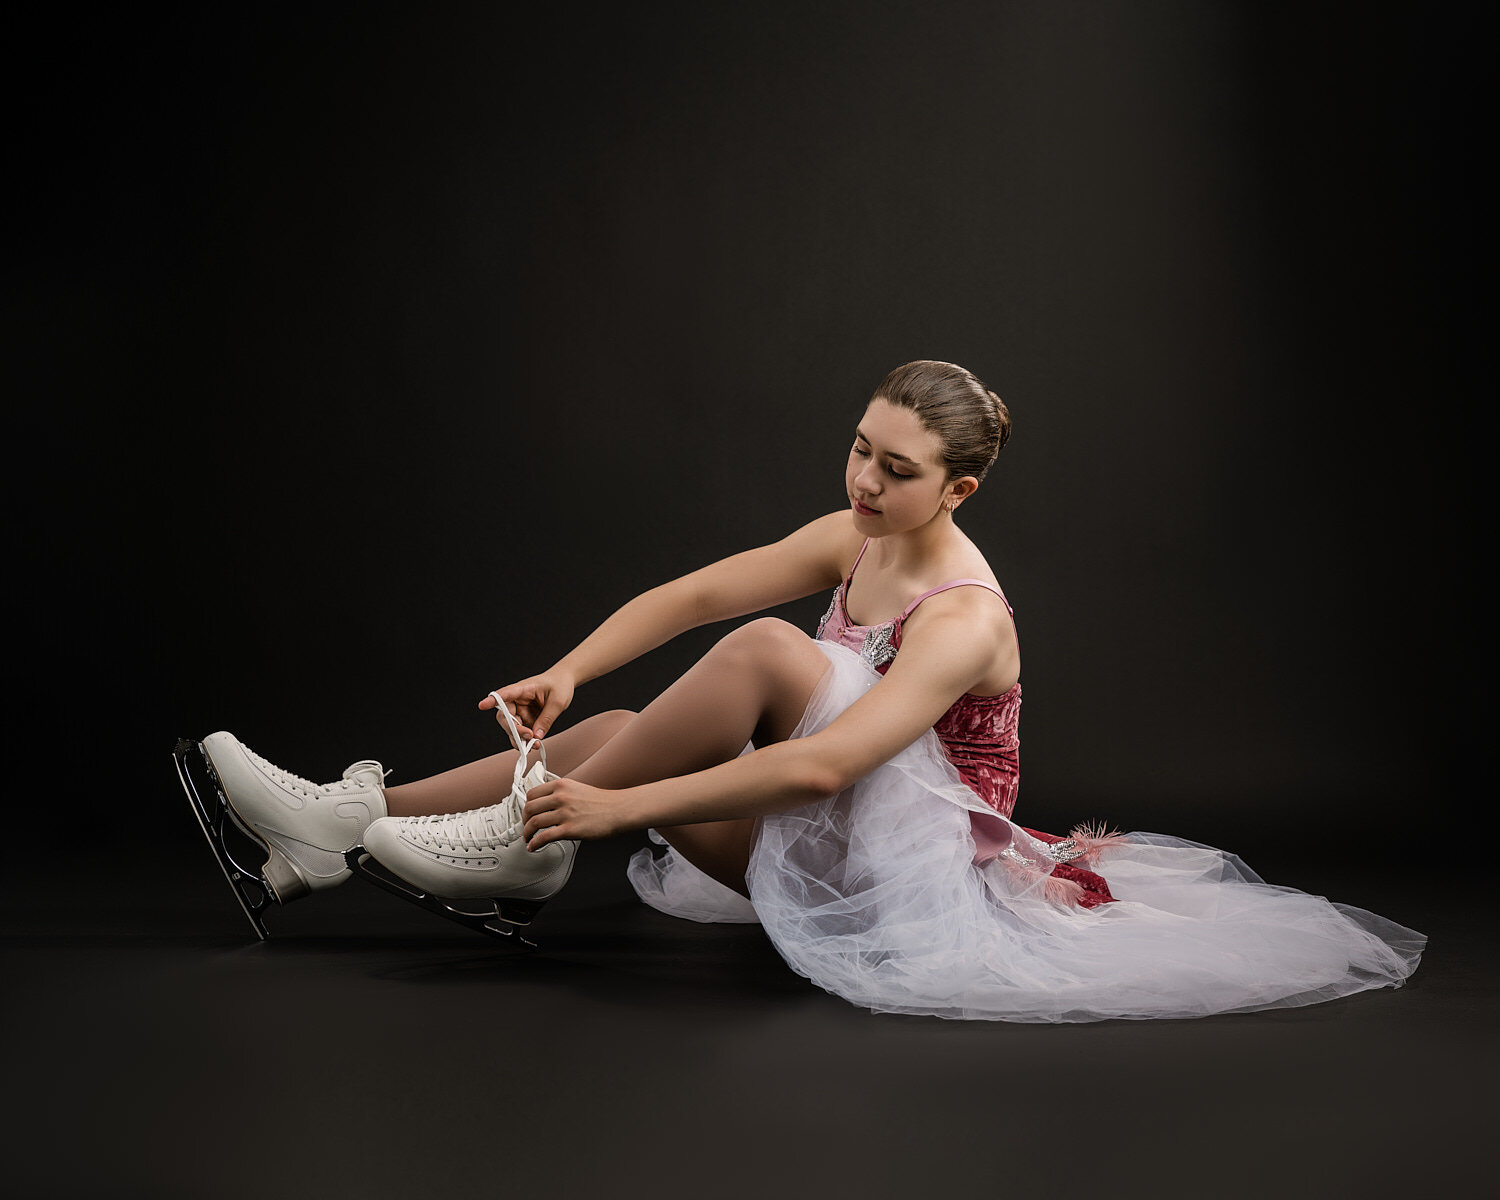  Ella Sanfilippo is posing in her ice skating costumes and made in Italy white skates in a professional photography studio against a black background. She has an athletic body and a beautiful face. 